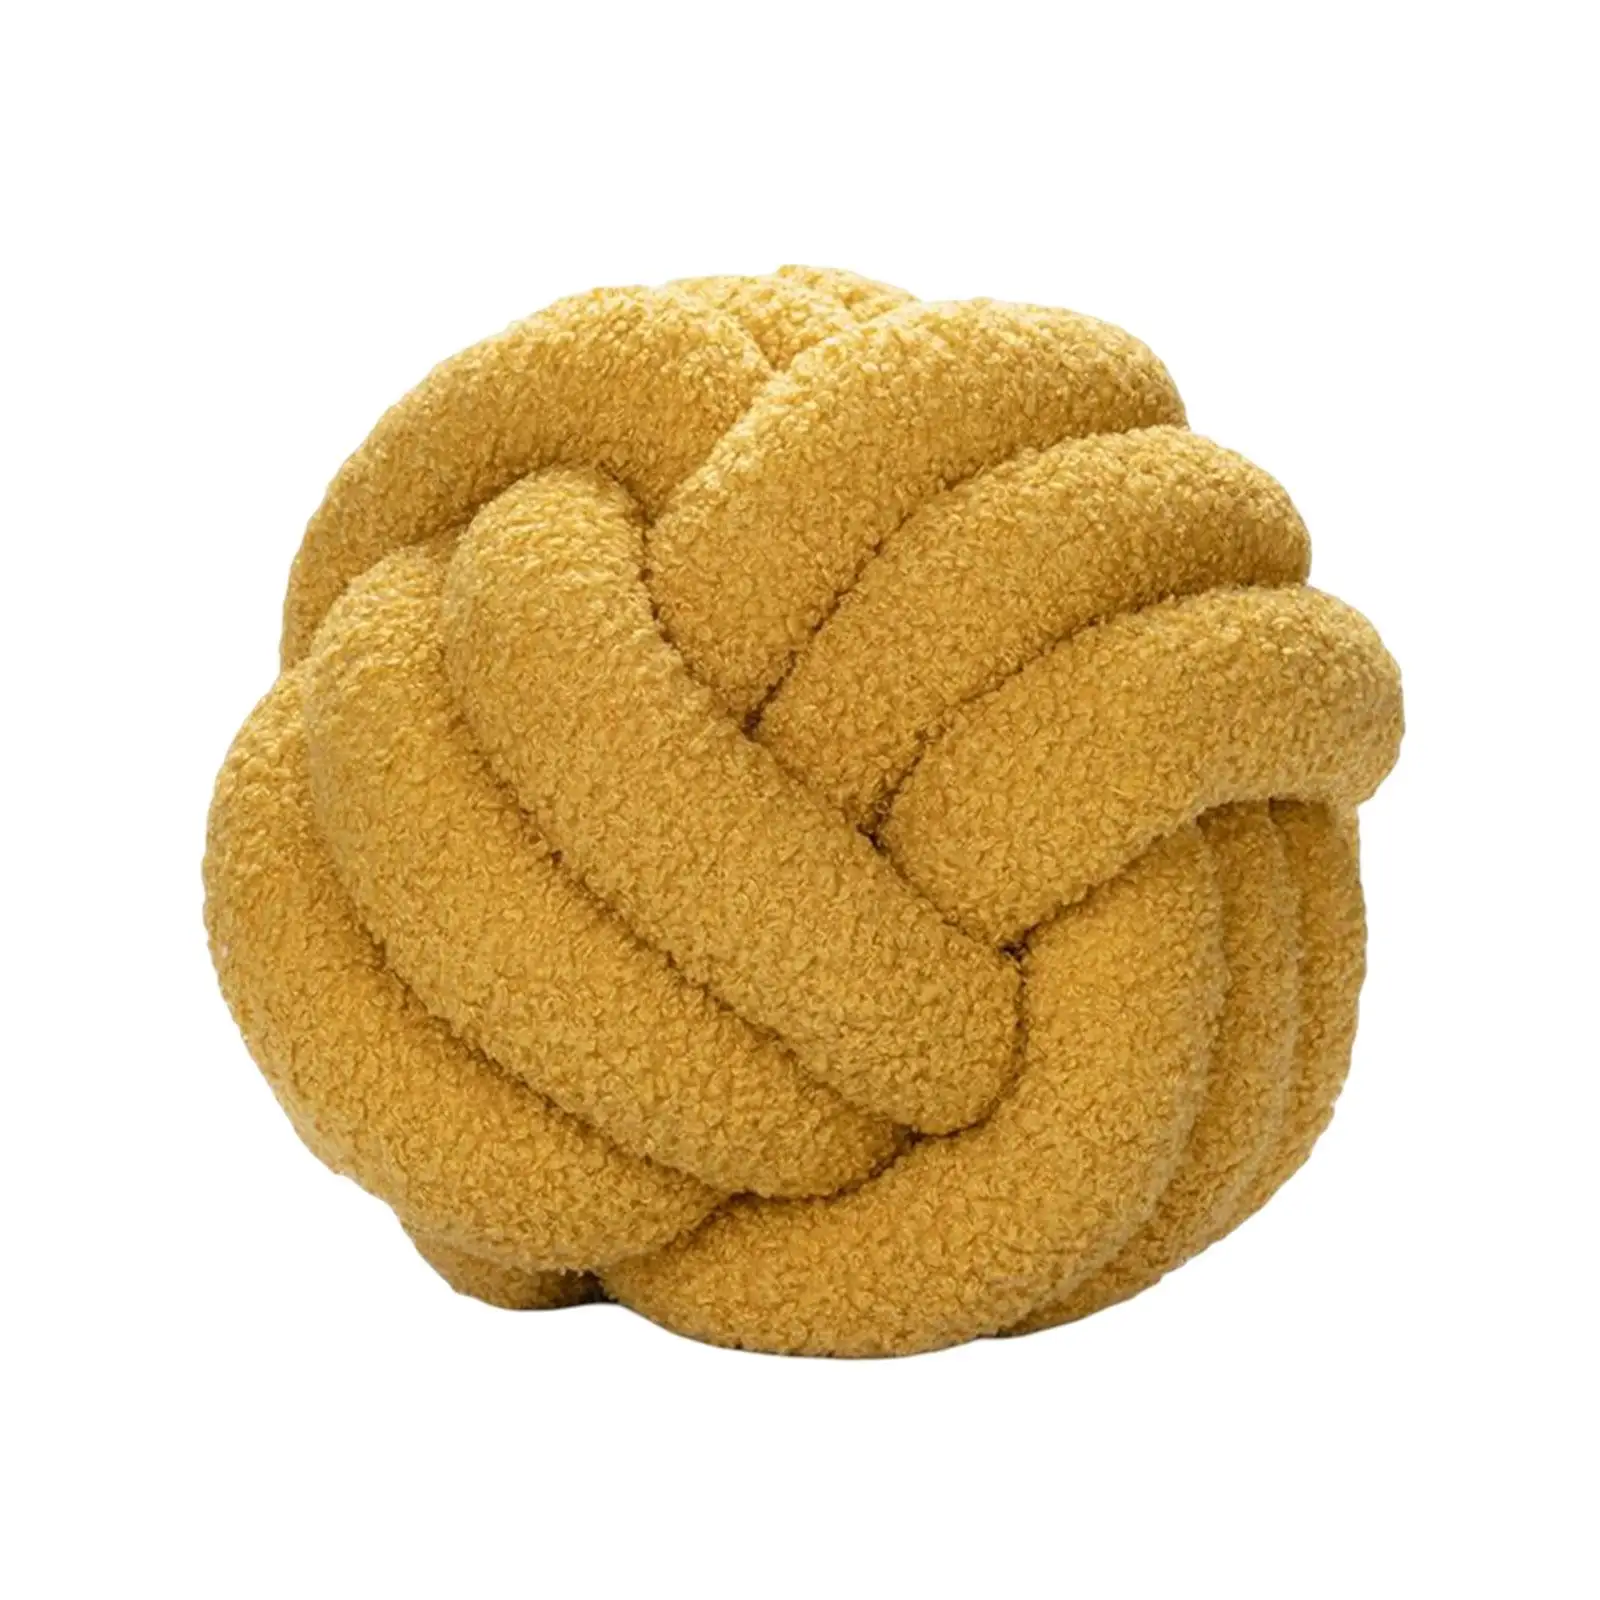 Plush Knot Ball Pillow 8.6inch Home Decoration Modern Photo Props for Office Decor